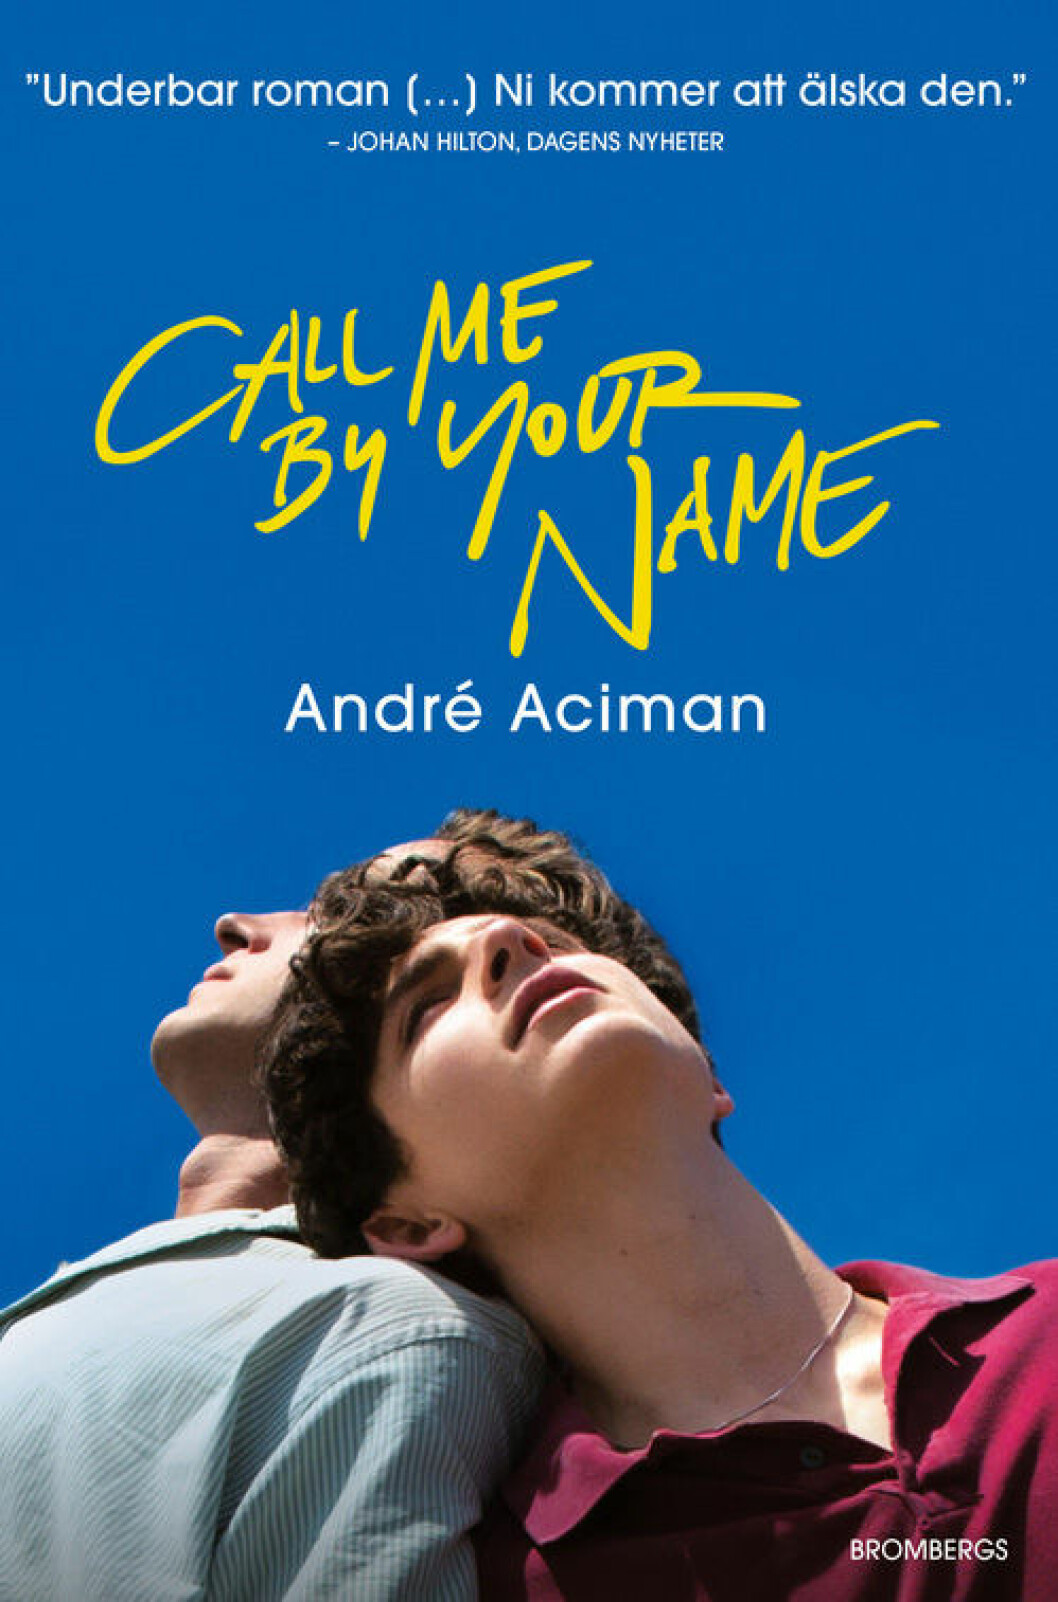 Call me by your name av André Aciman.